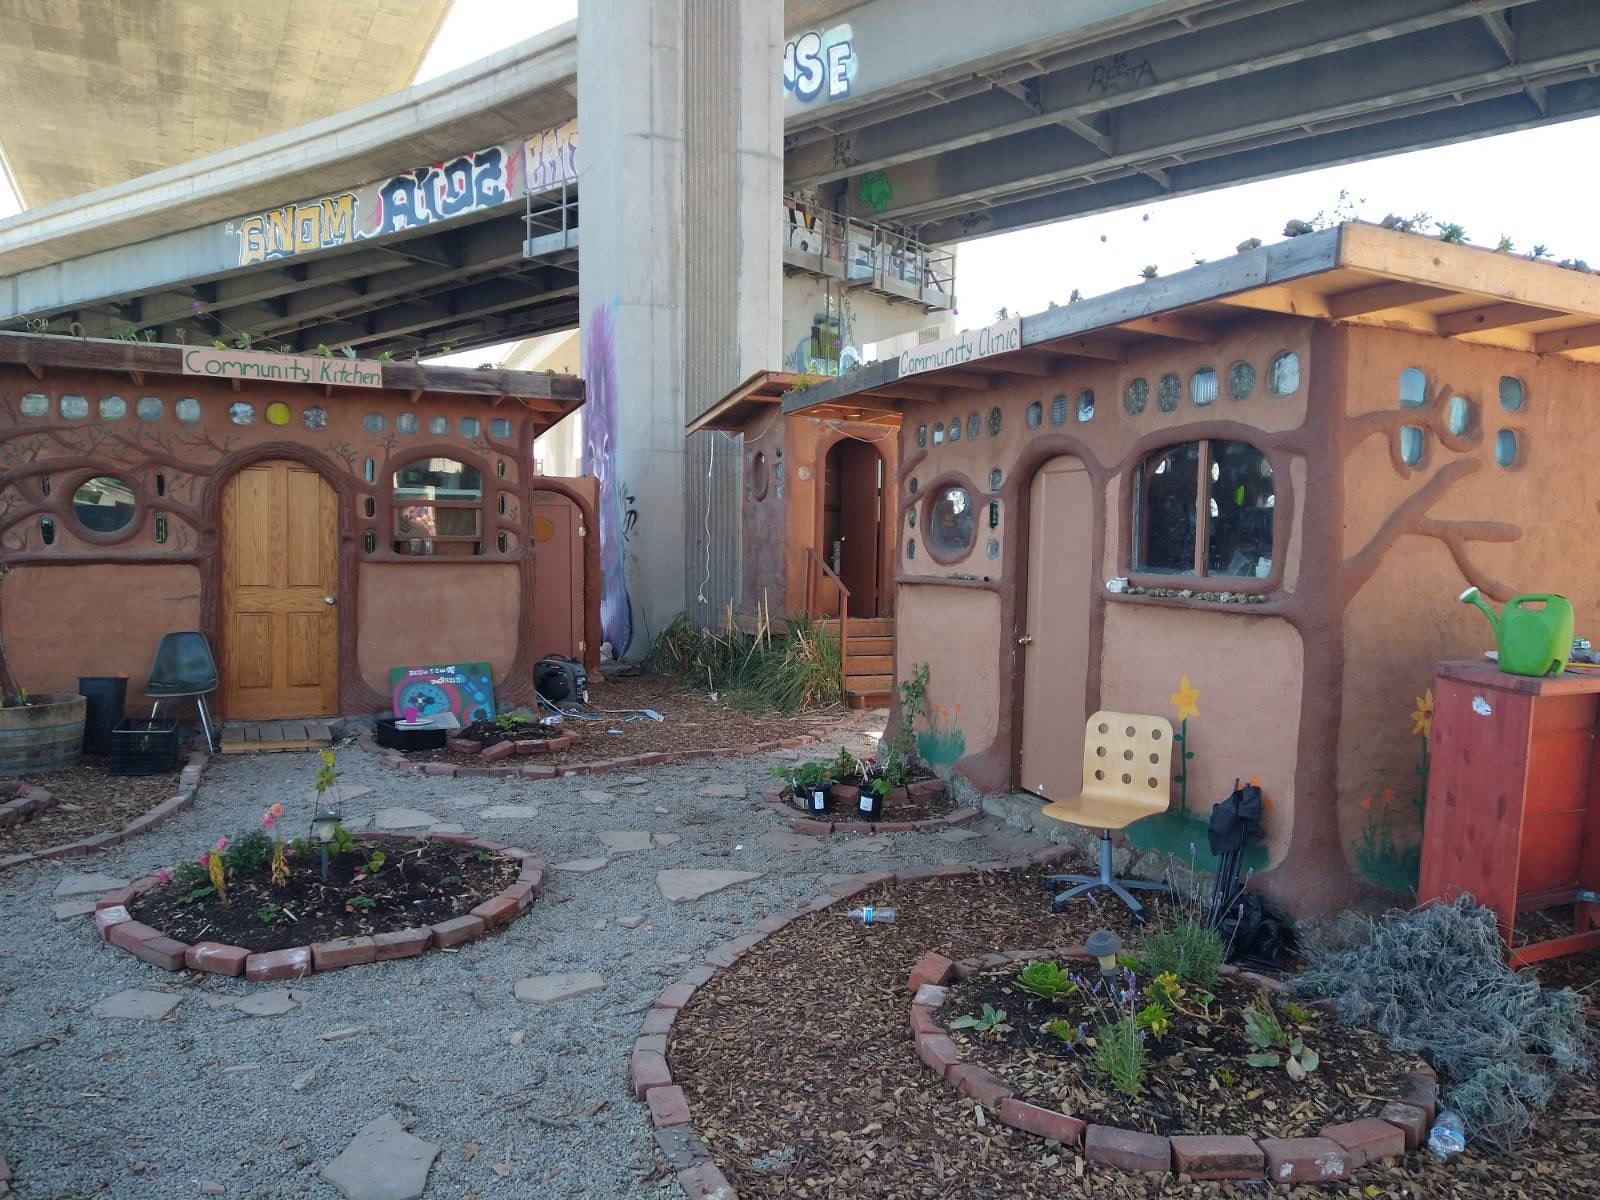 The kitchen and community clinic at Cob on Wood, an eco-village built inside a massive homeless encampment in Oakland, where residents may soon be evicted.